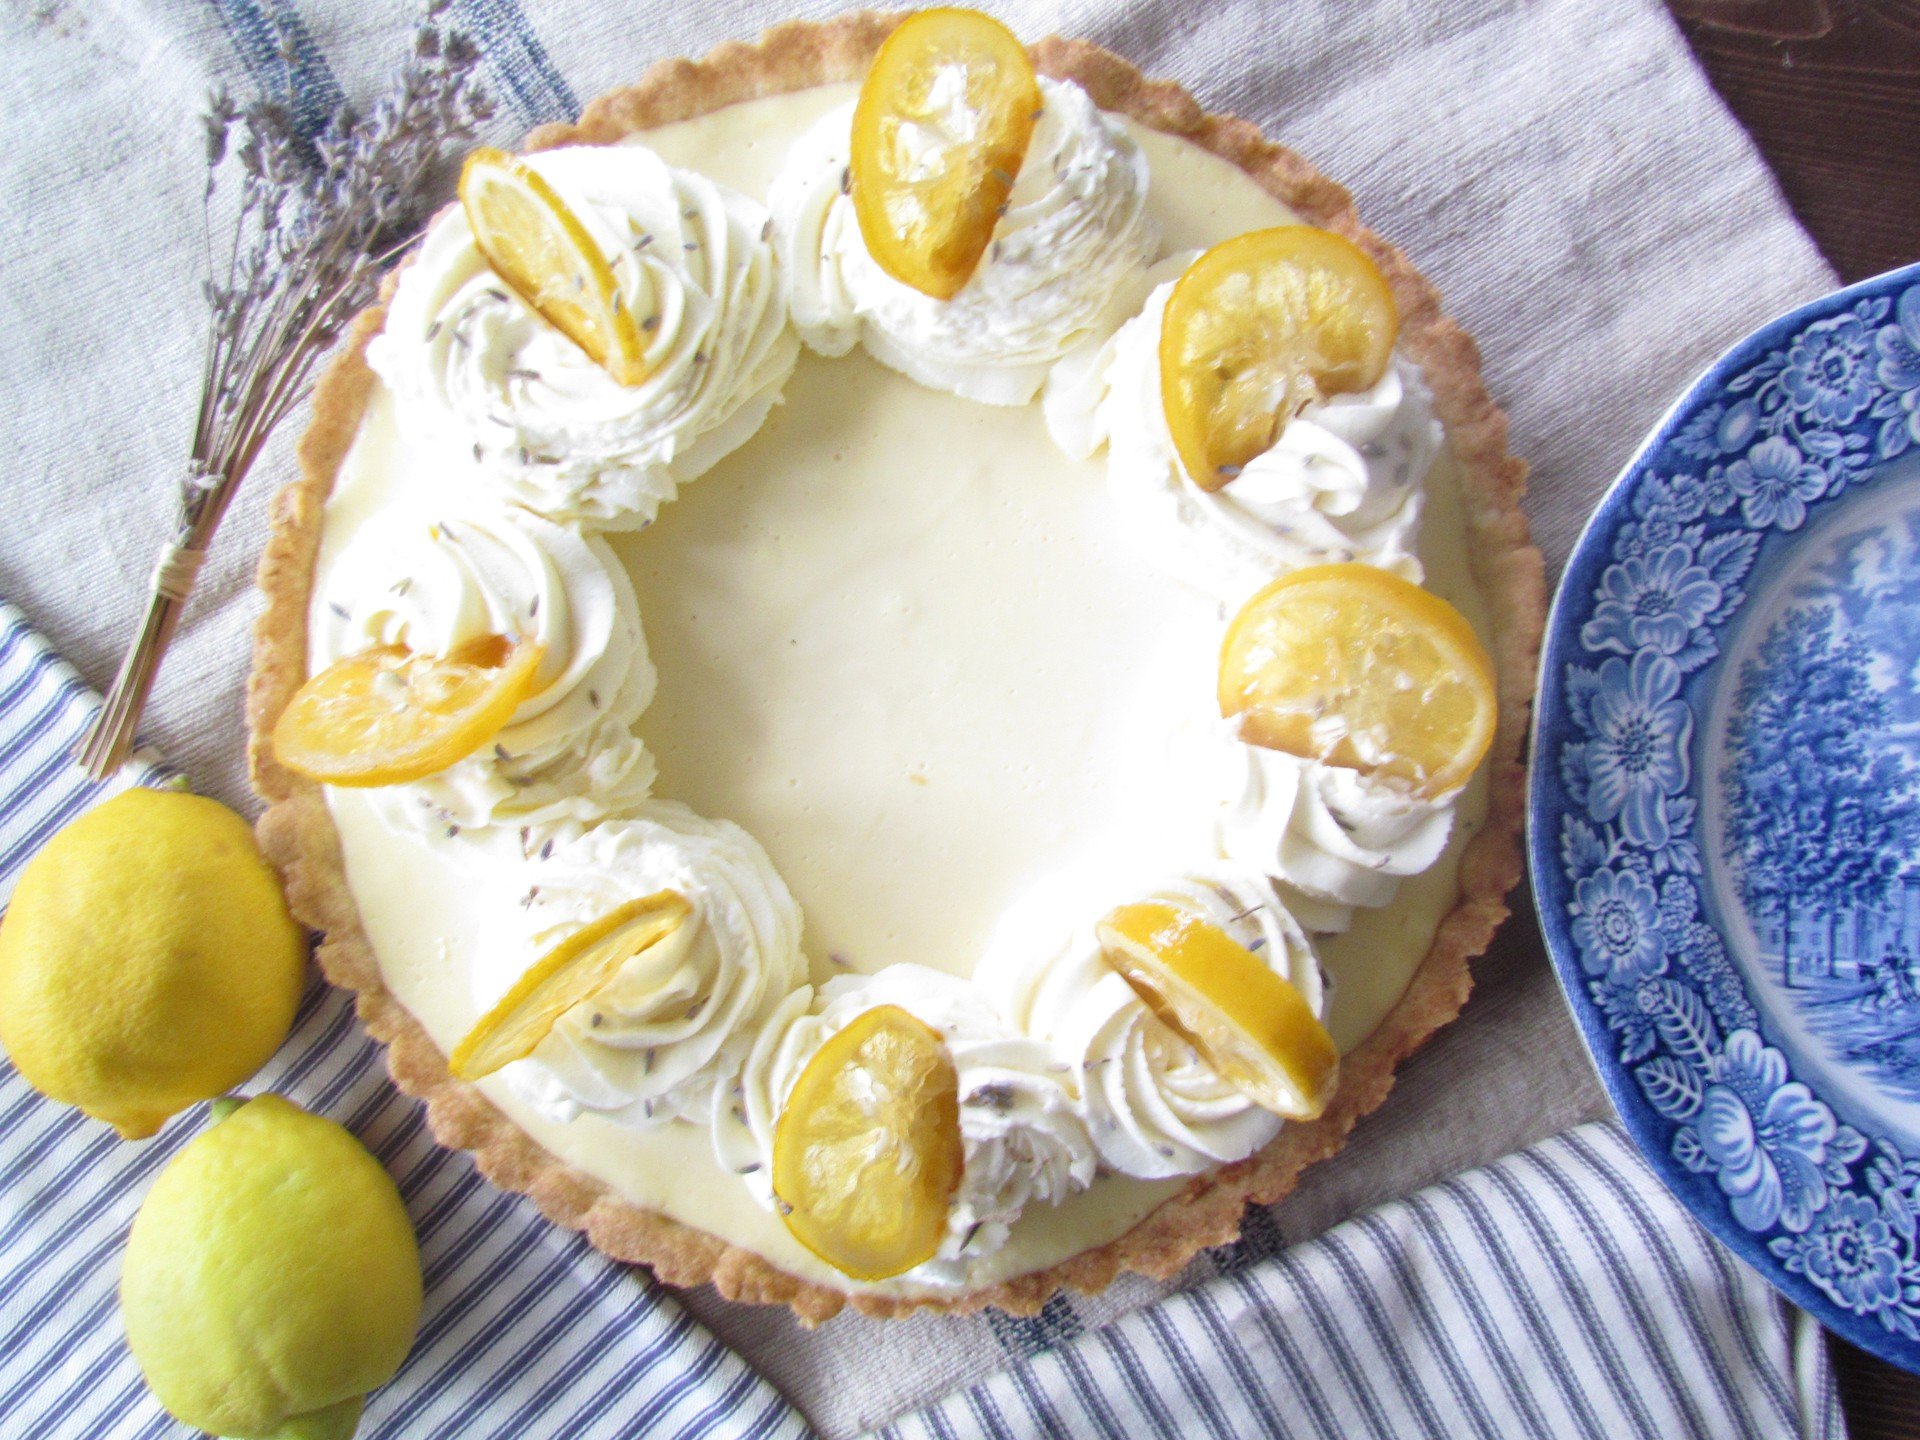 We are so fortunate to have @sheepshopbaker create for us every week such unique and fine pastries like this creamy lemon tart with lavender scented crust and mascarpone whipped cream. What a treat! Also on the menu this week at the Sheep Shop caf&ea